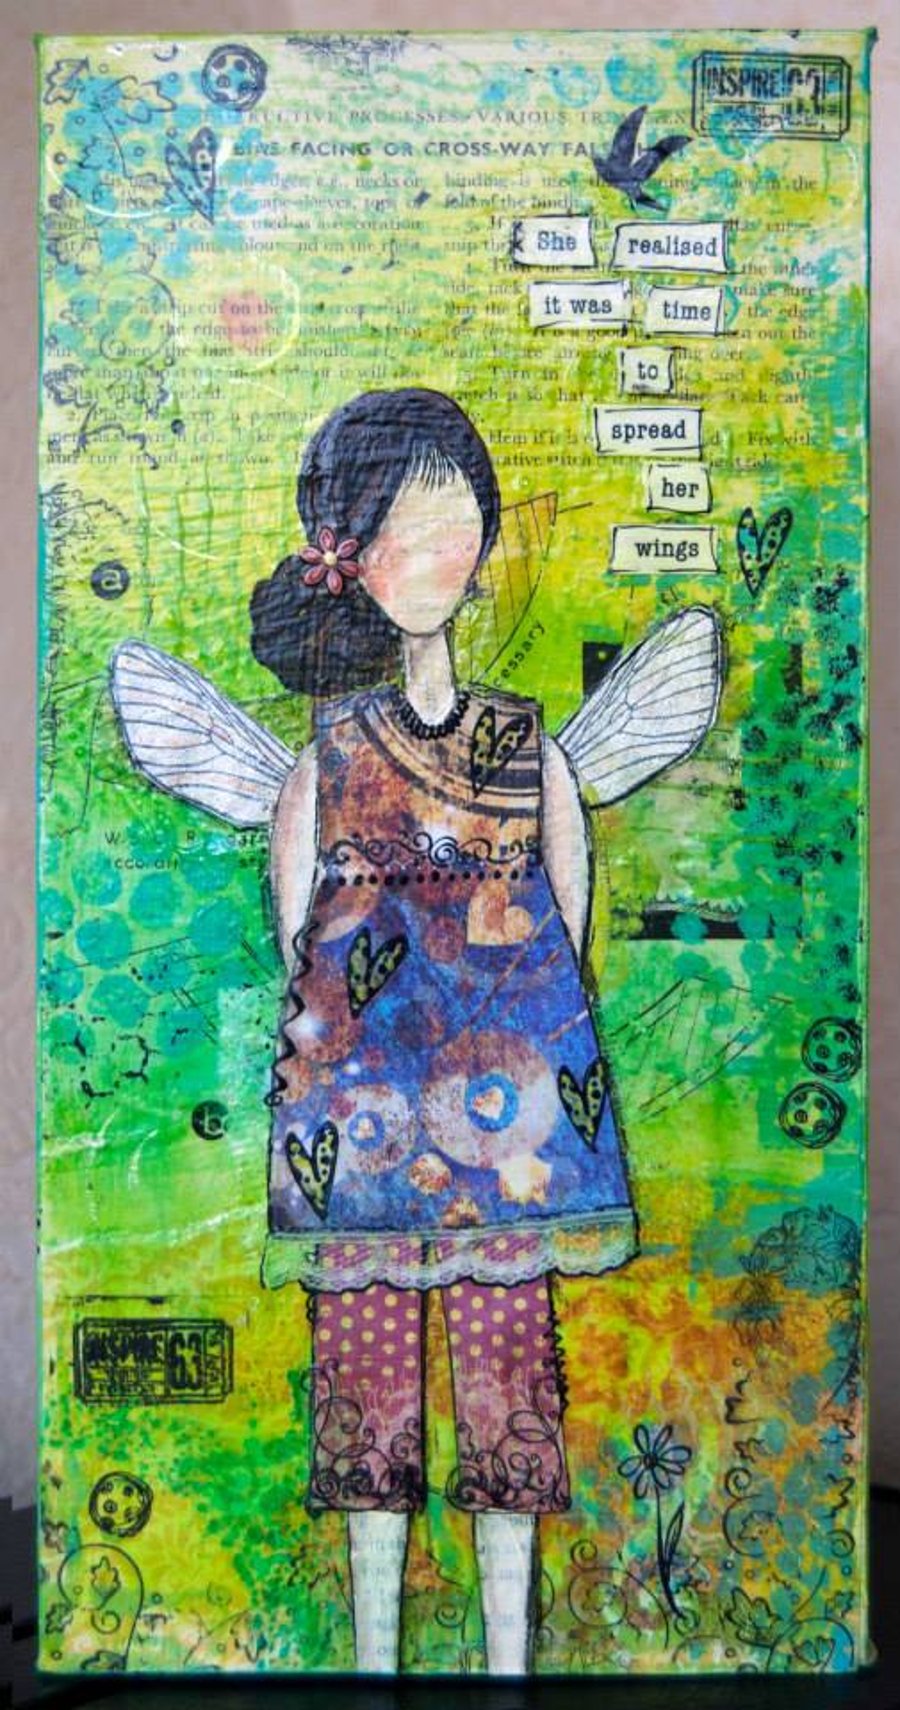 Time to Spread her Wings - Mixed media painting